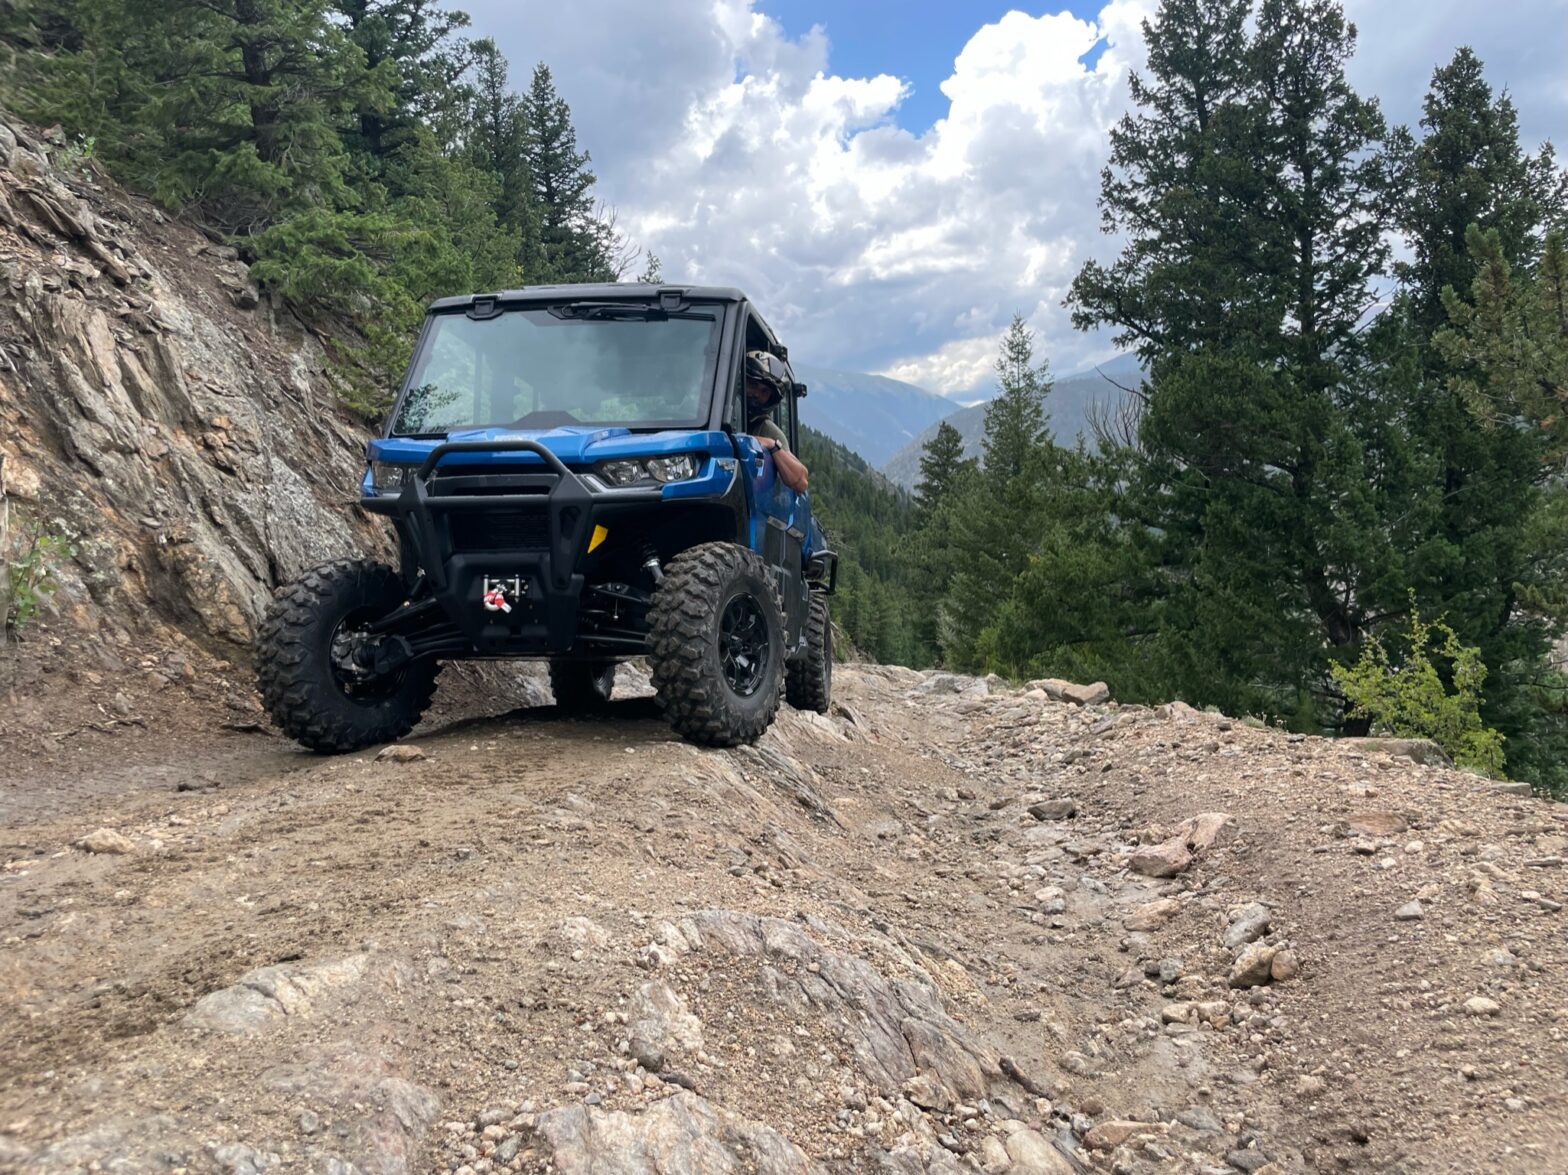 UTV on a trail in Colorado with pine trees and mountains in the background